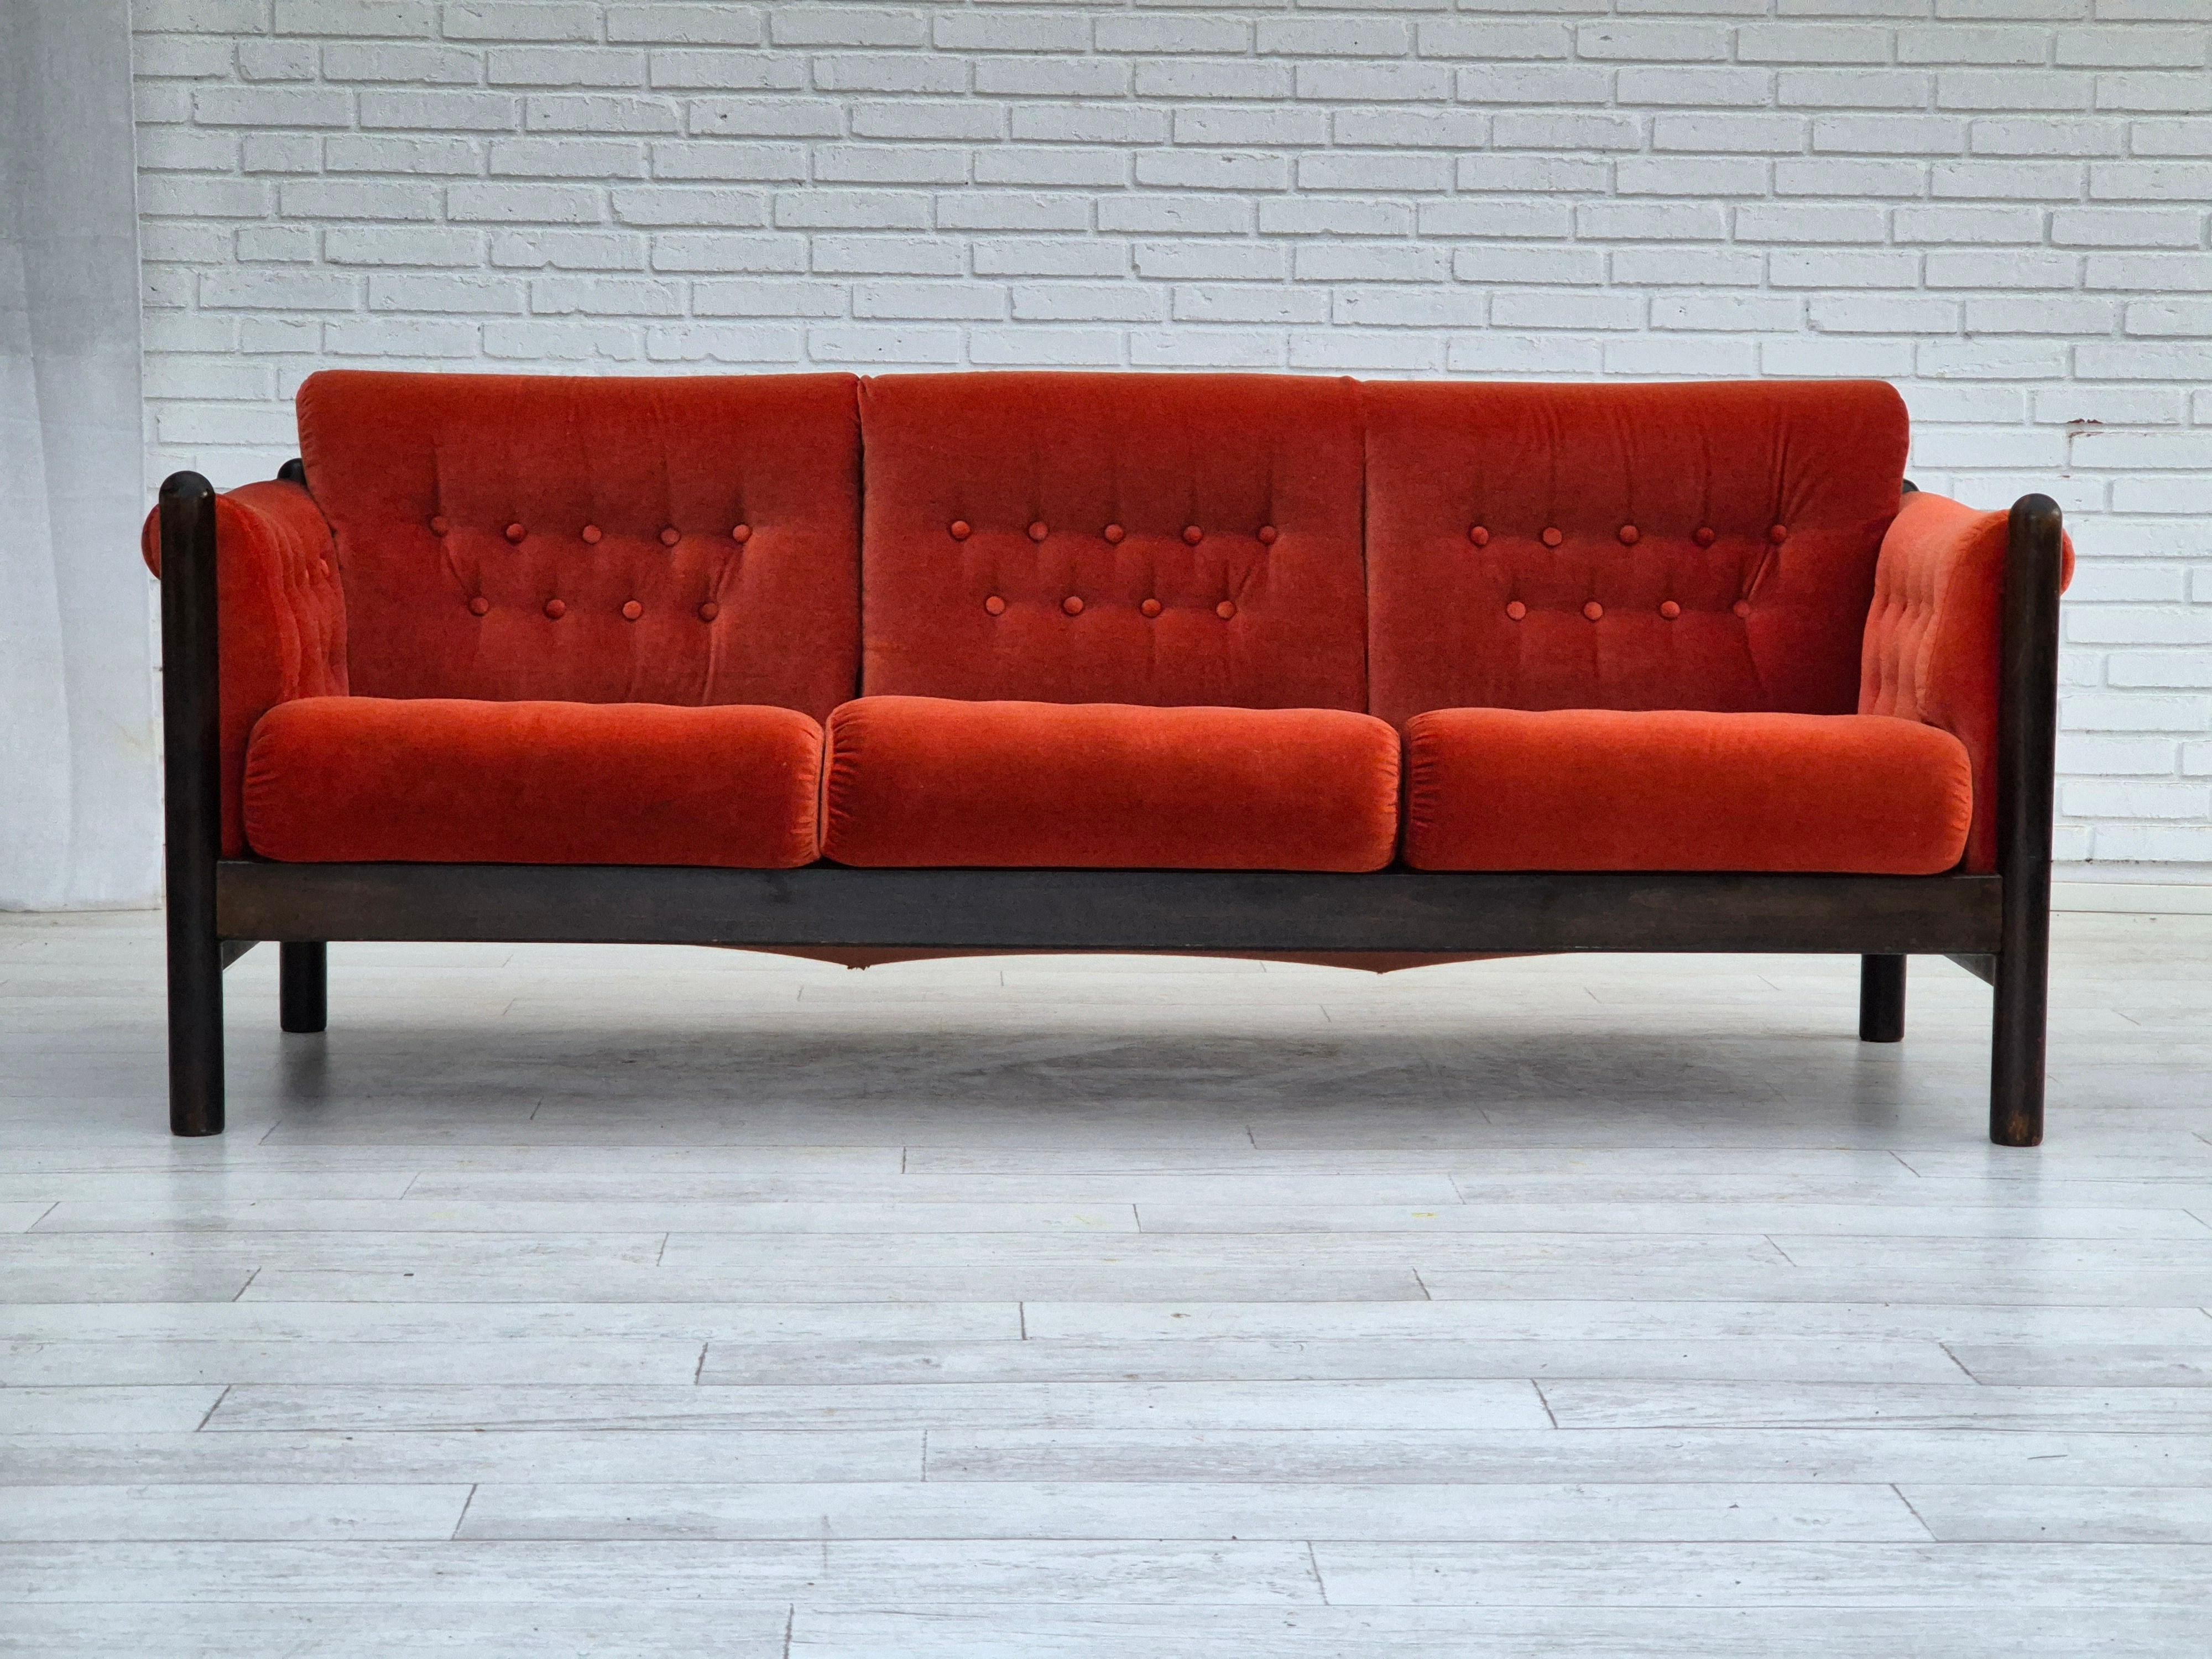 1980s, Scandinavian 3 seater sofa in original very good condition: no smells and no stains. Light red furniture velour, dark oak wood. Manufactured by Norwegian or Danish furniture manufacturer in about 1980-85s.